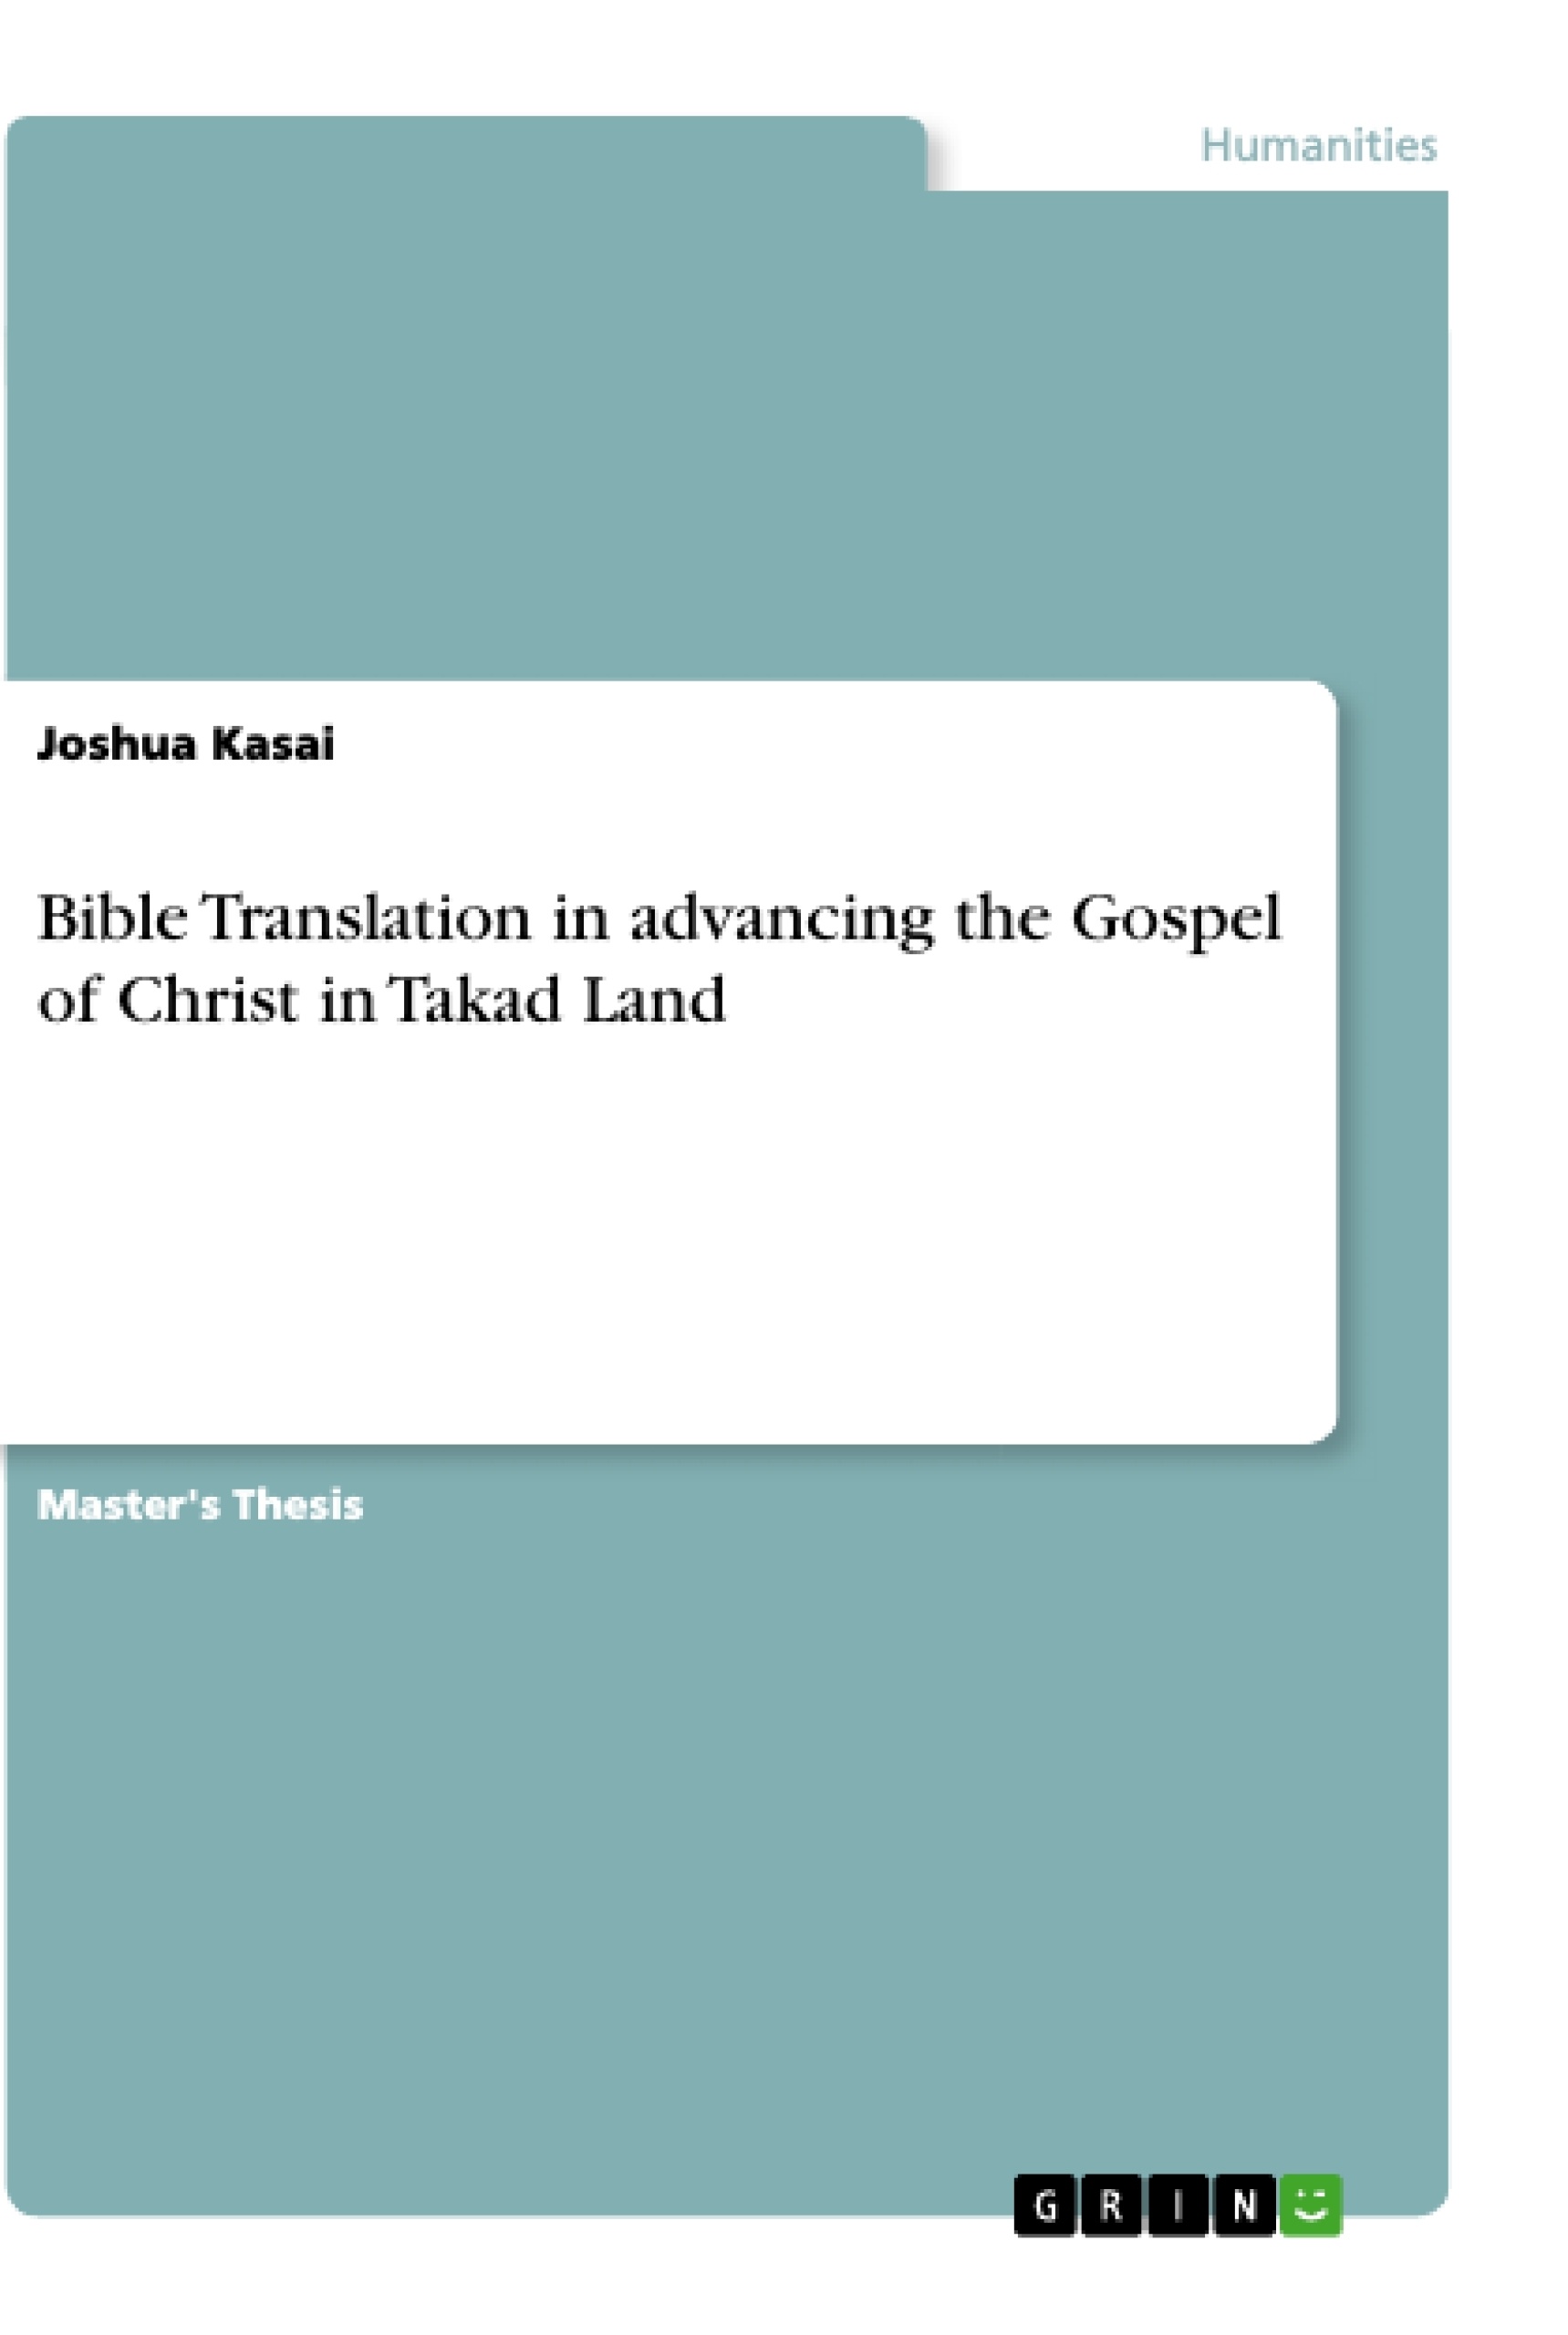 Title: Bible Translation in advancing the Gospel of Christ in Takad Land